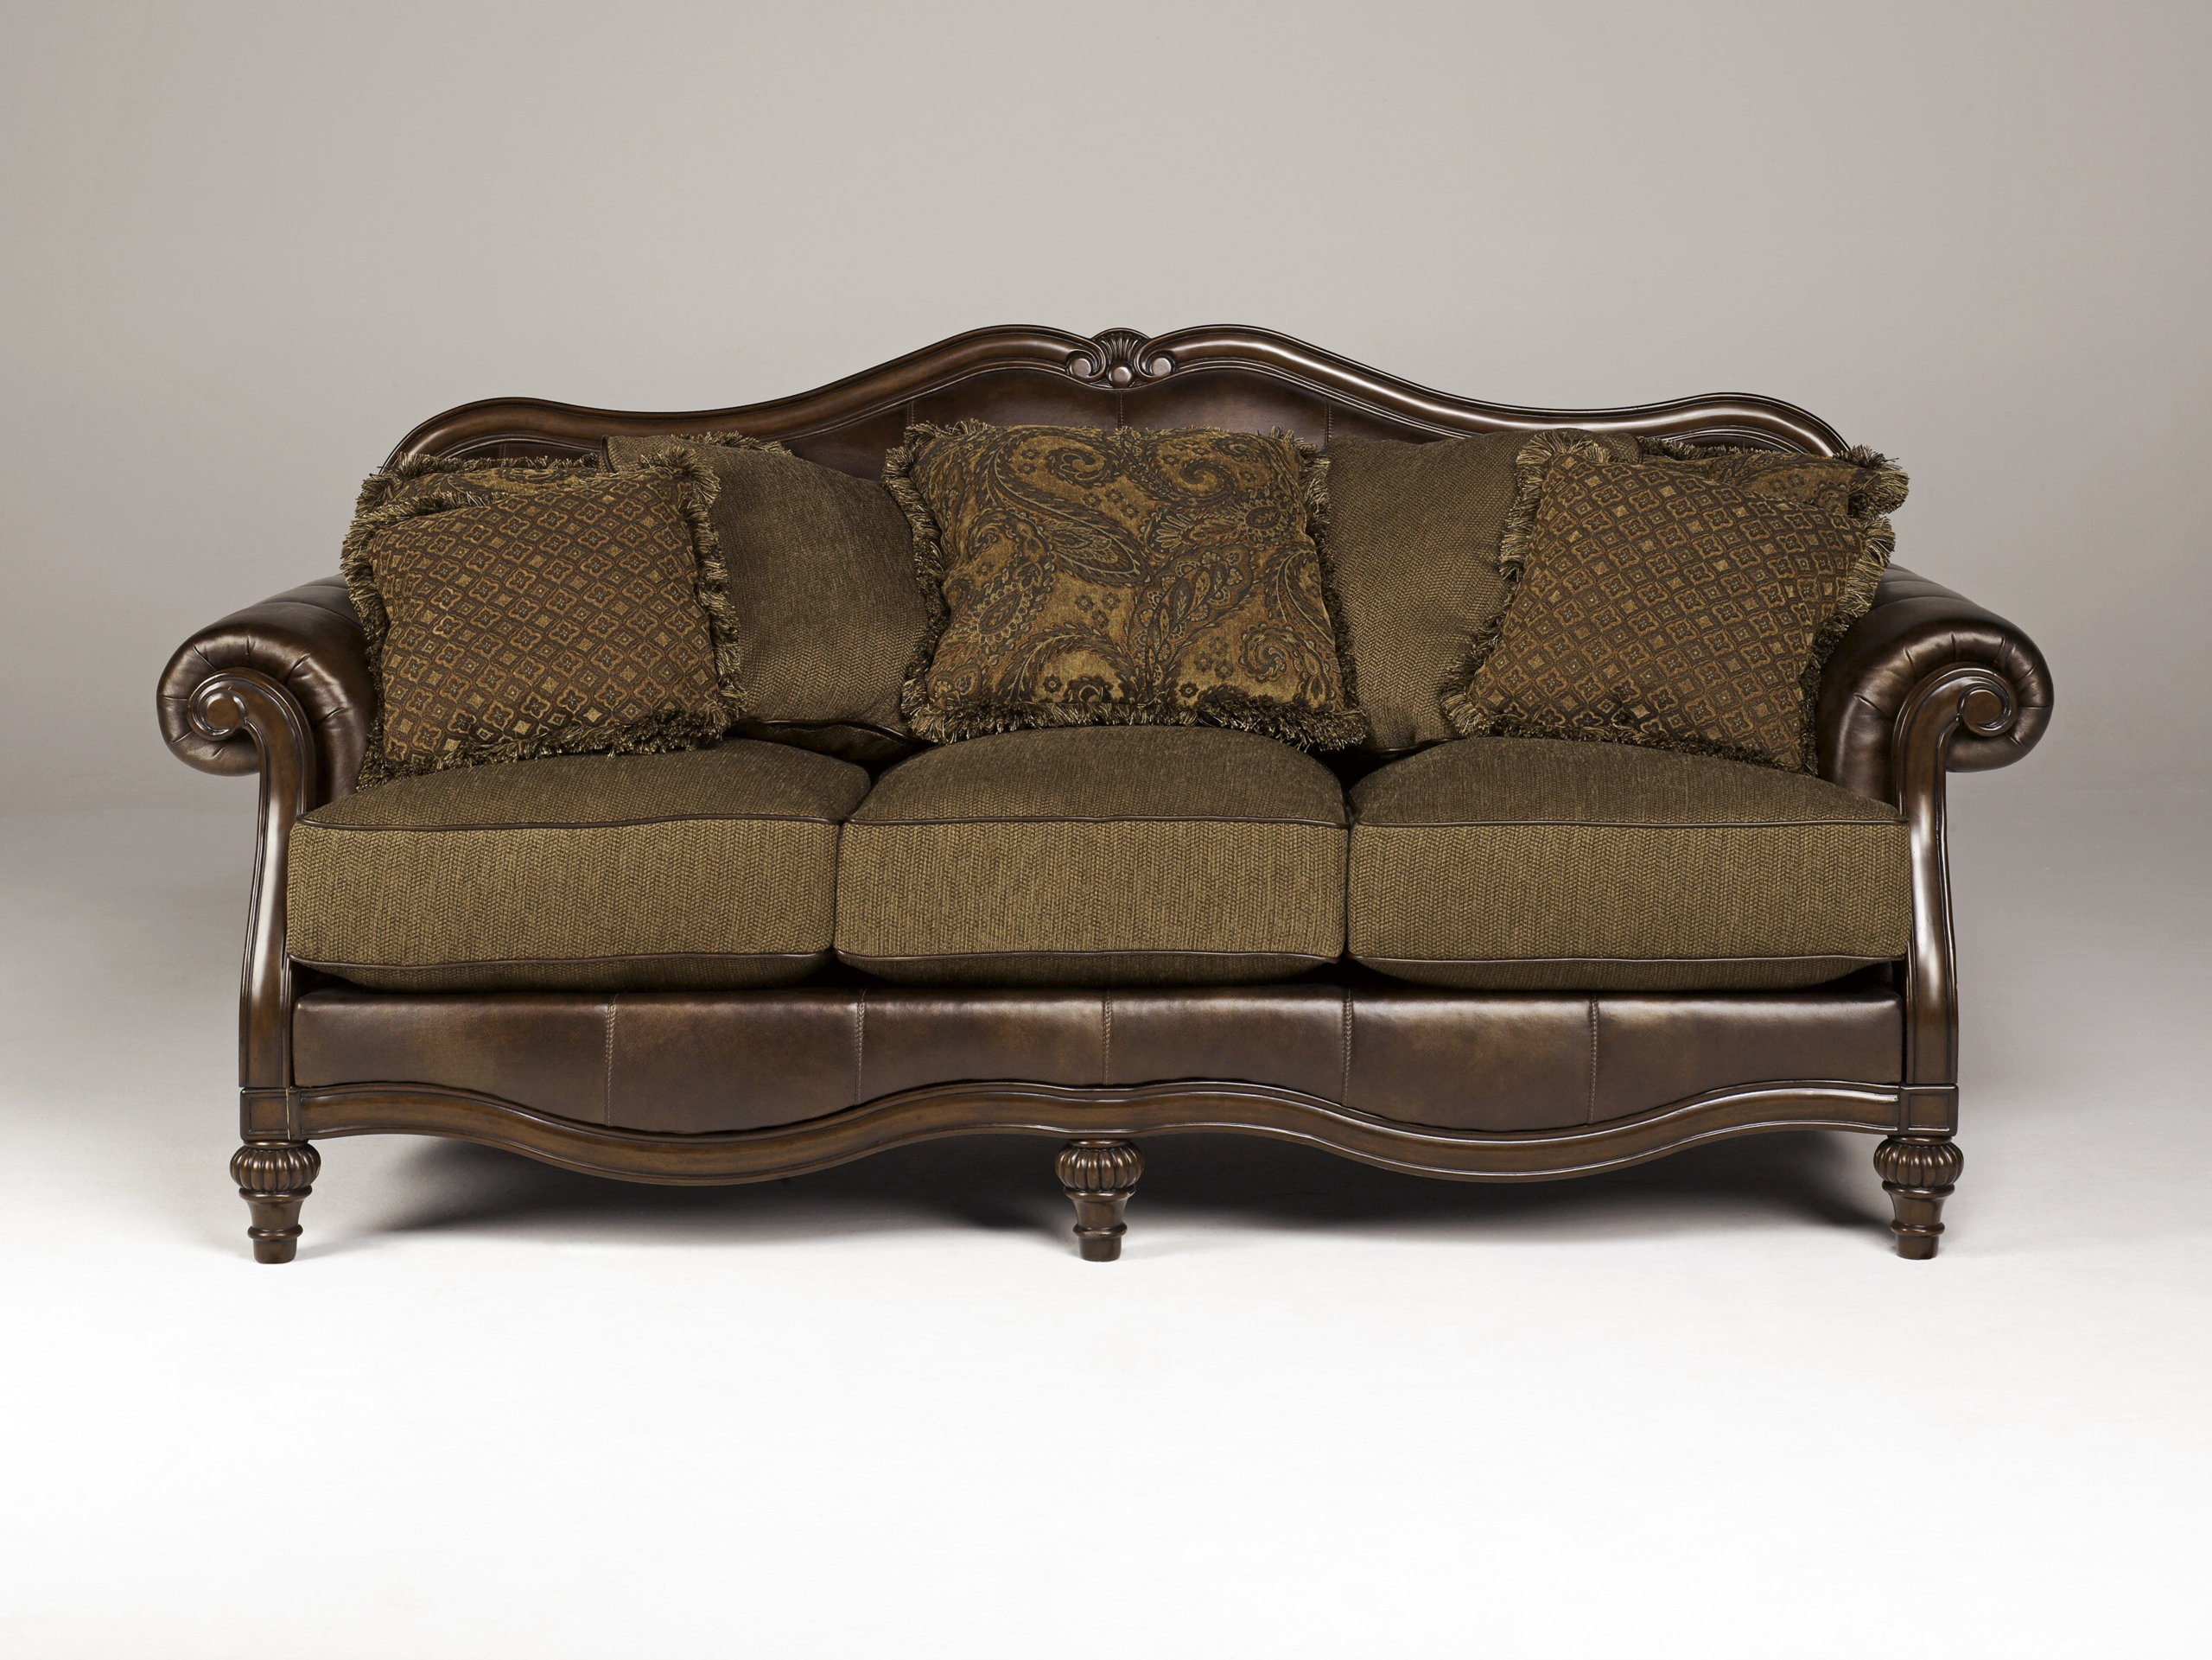 Leather sofa with wood trim